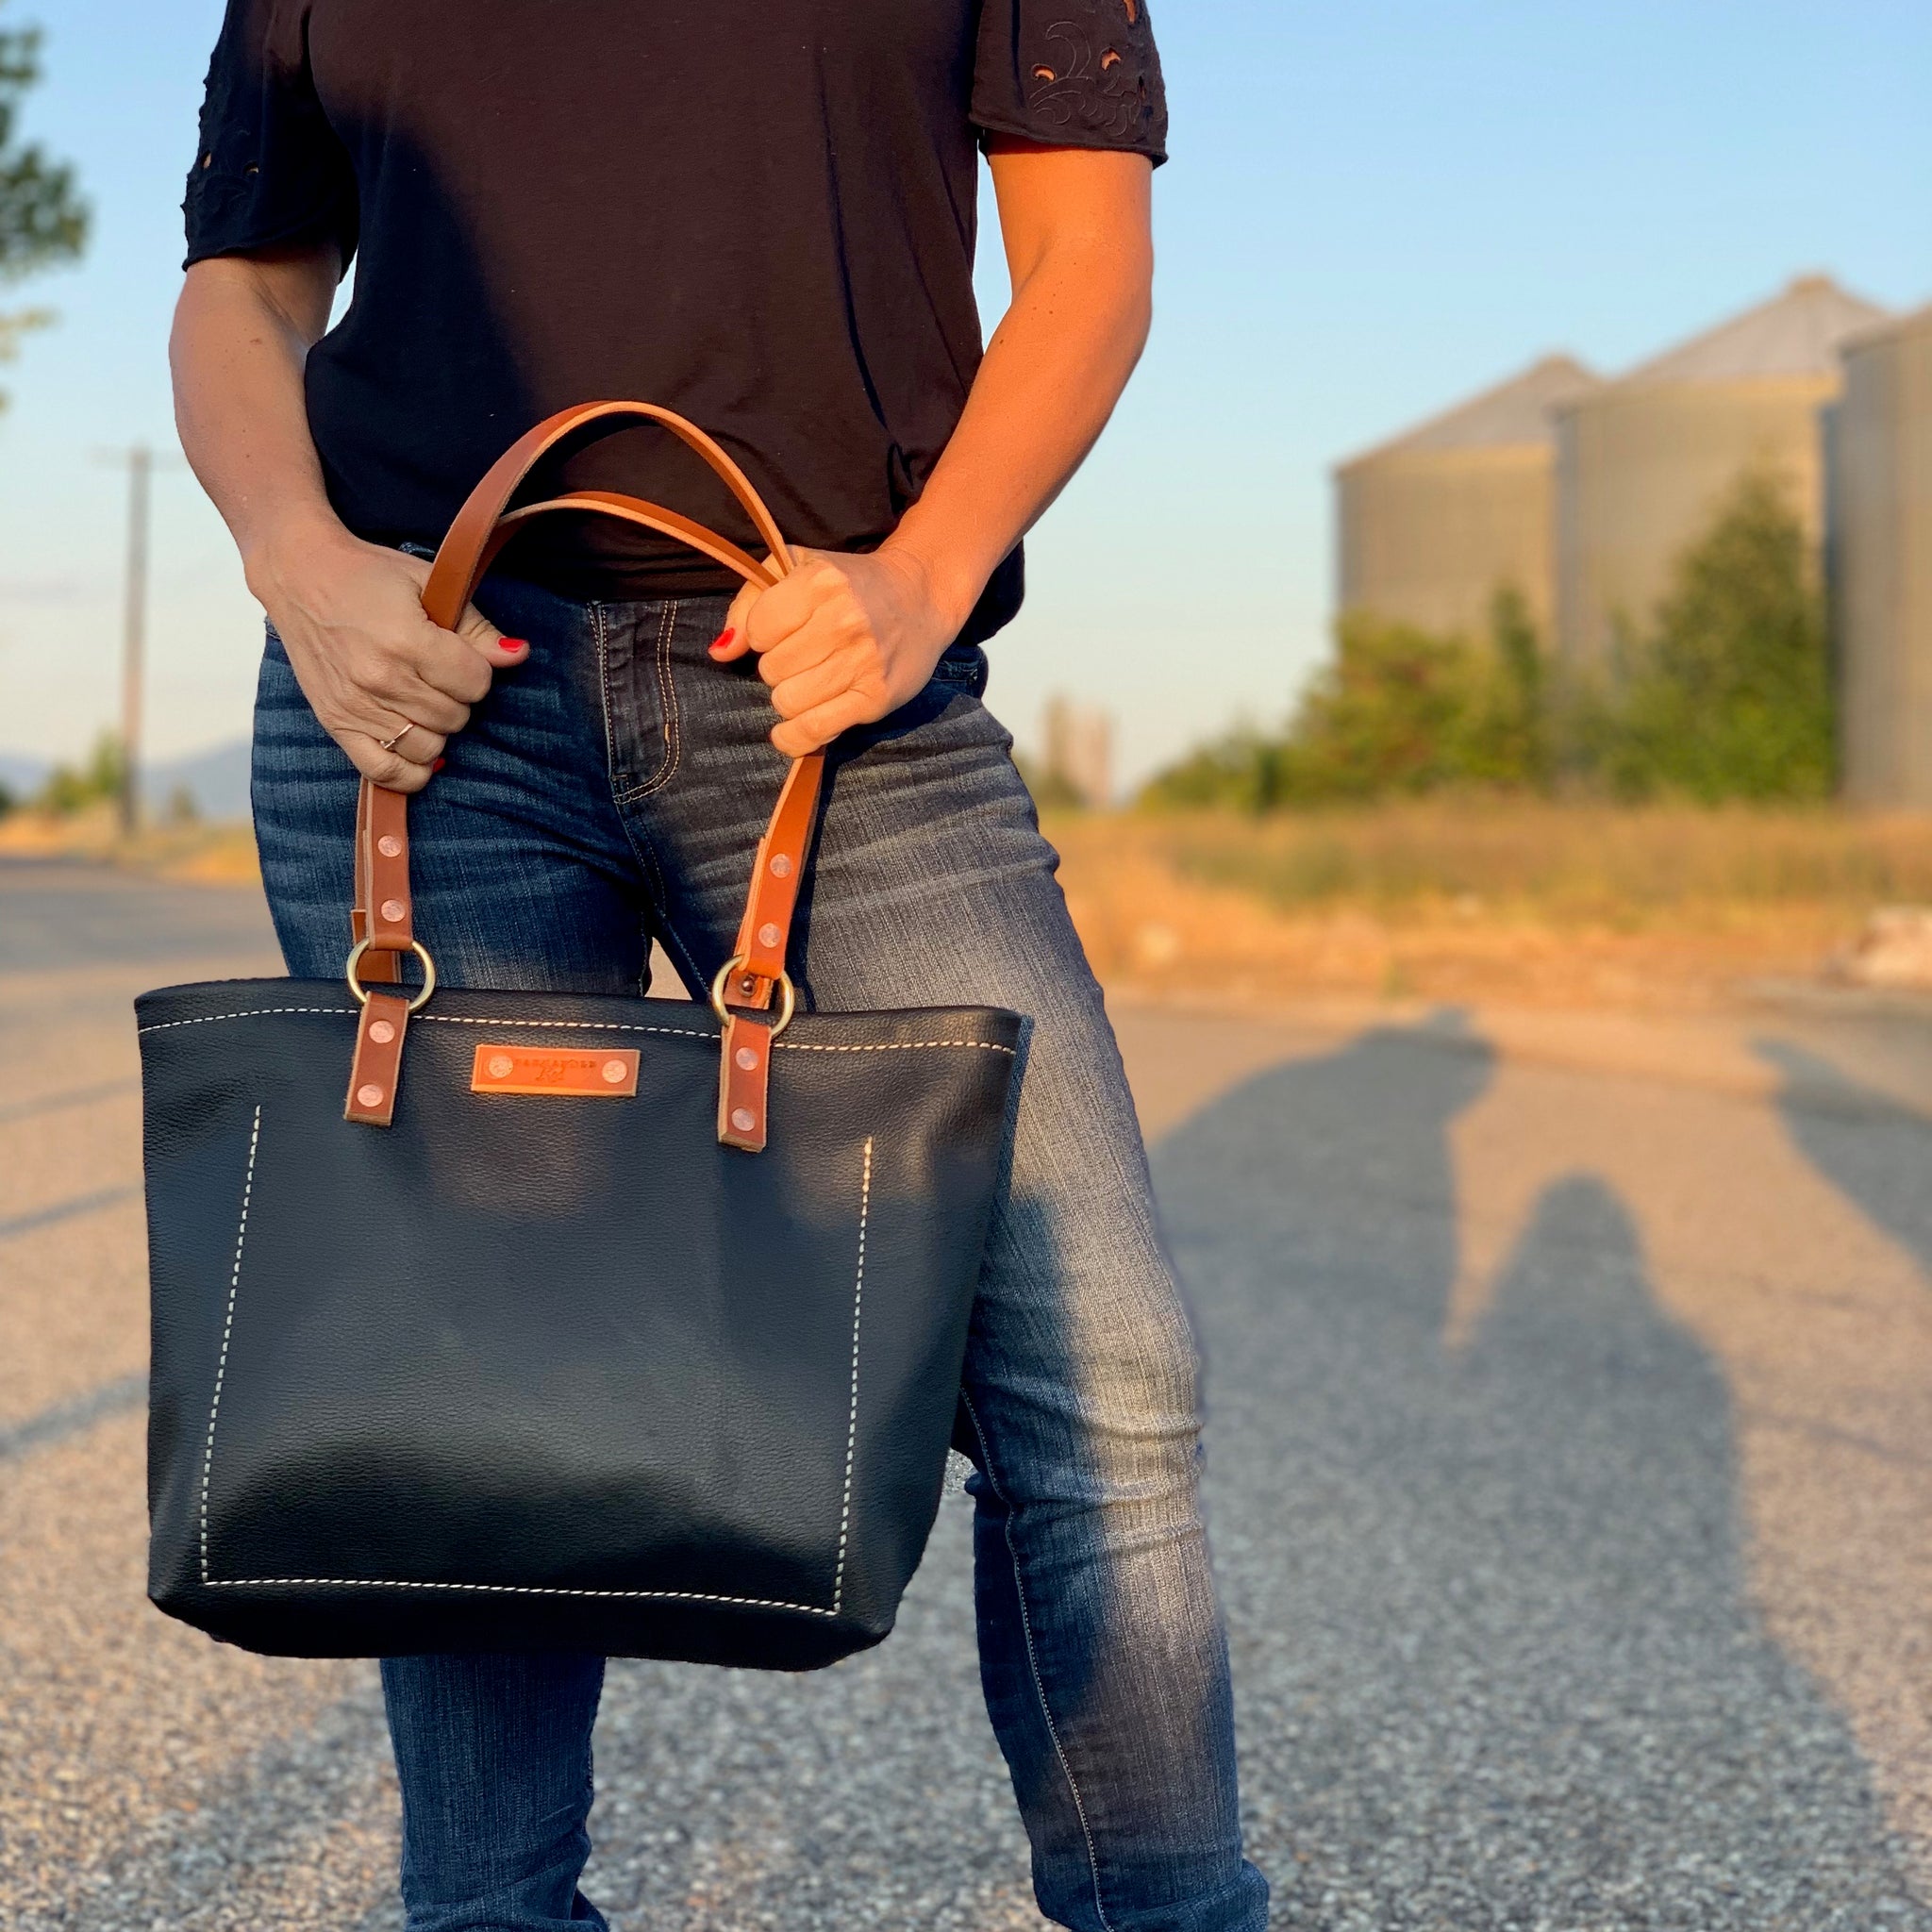 Black Leather Bag, Black Leather Tote Bag, Black Leather Bag, Black Purse, Black Leather, Purses, Handbags, Tote Bags, Messenger bags, Panhandle Red Leather Company, gift shop. 